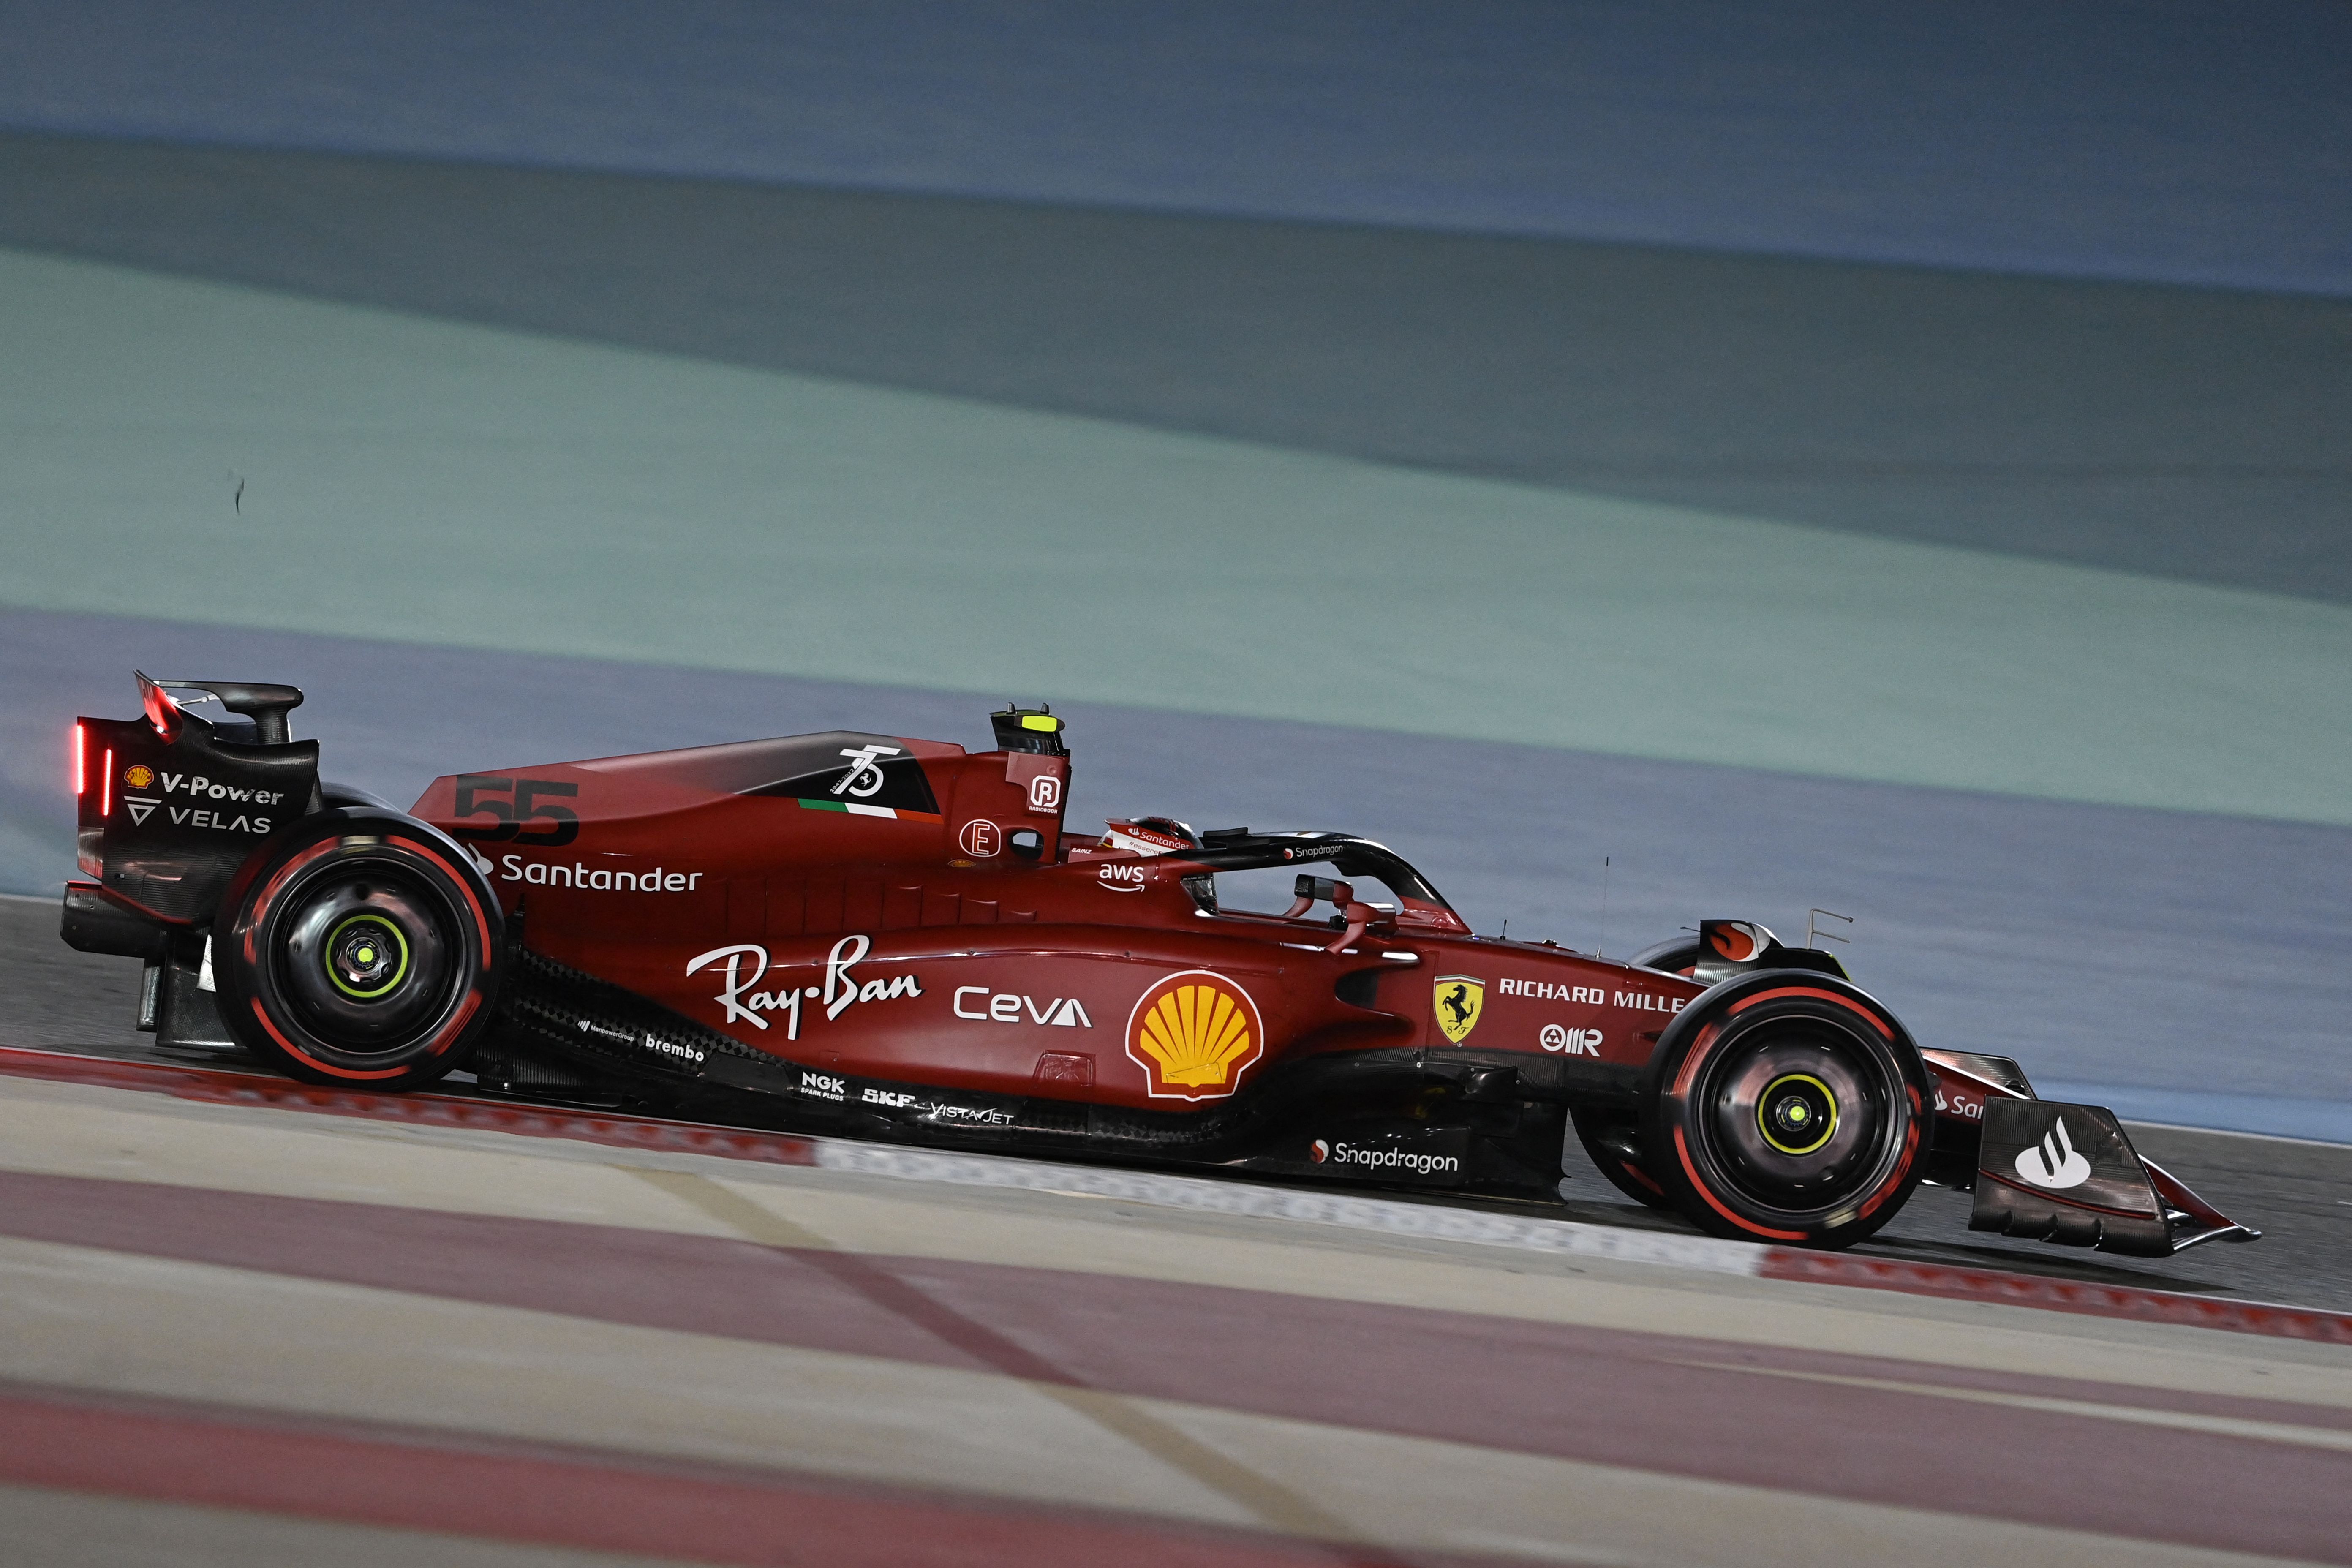 Gallery: Ferrari F1 Team Makes The Perfect Start To 2022 With 1 2 Finish In Bahrain